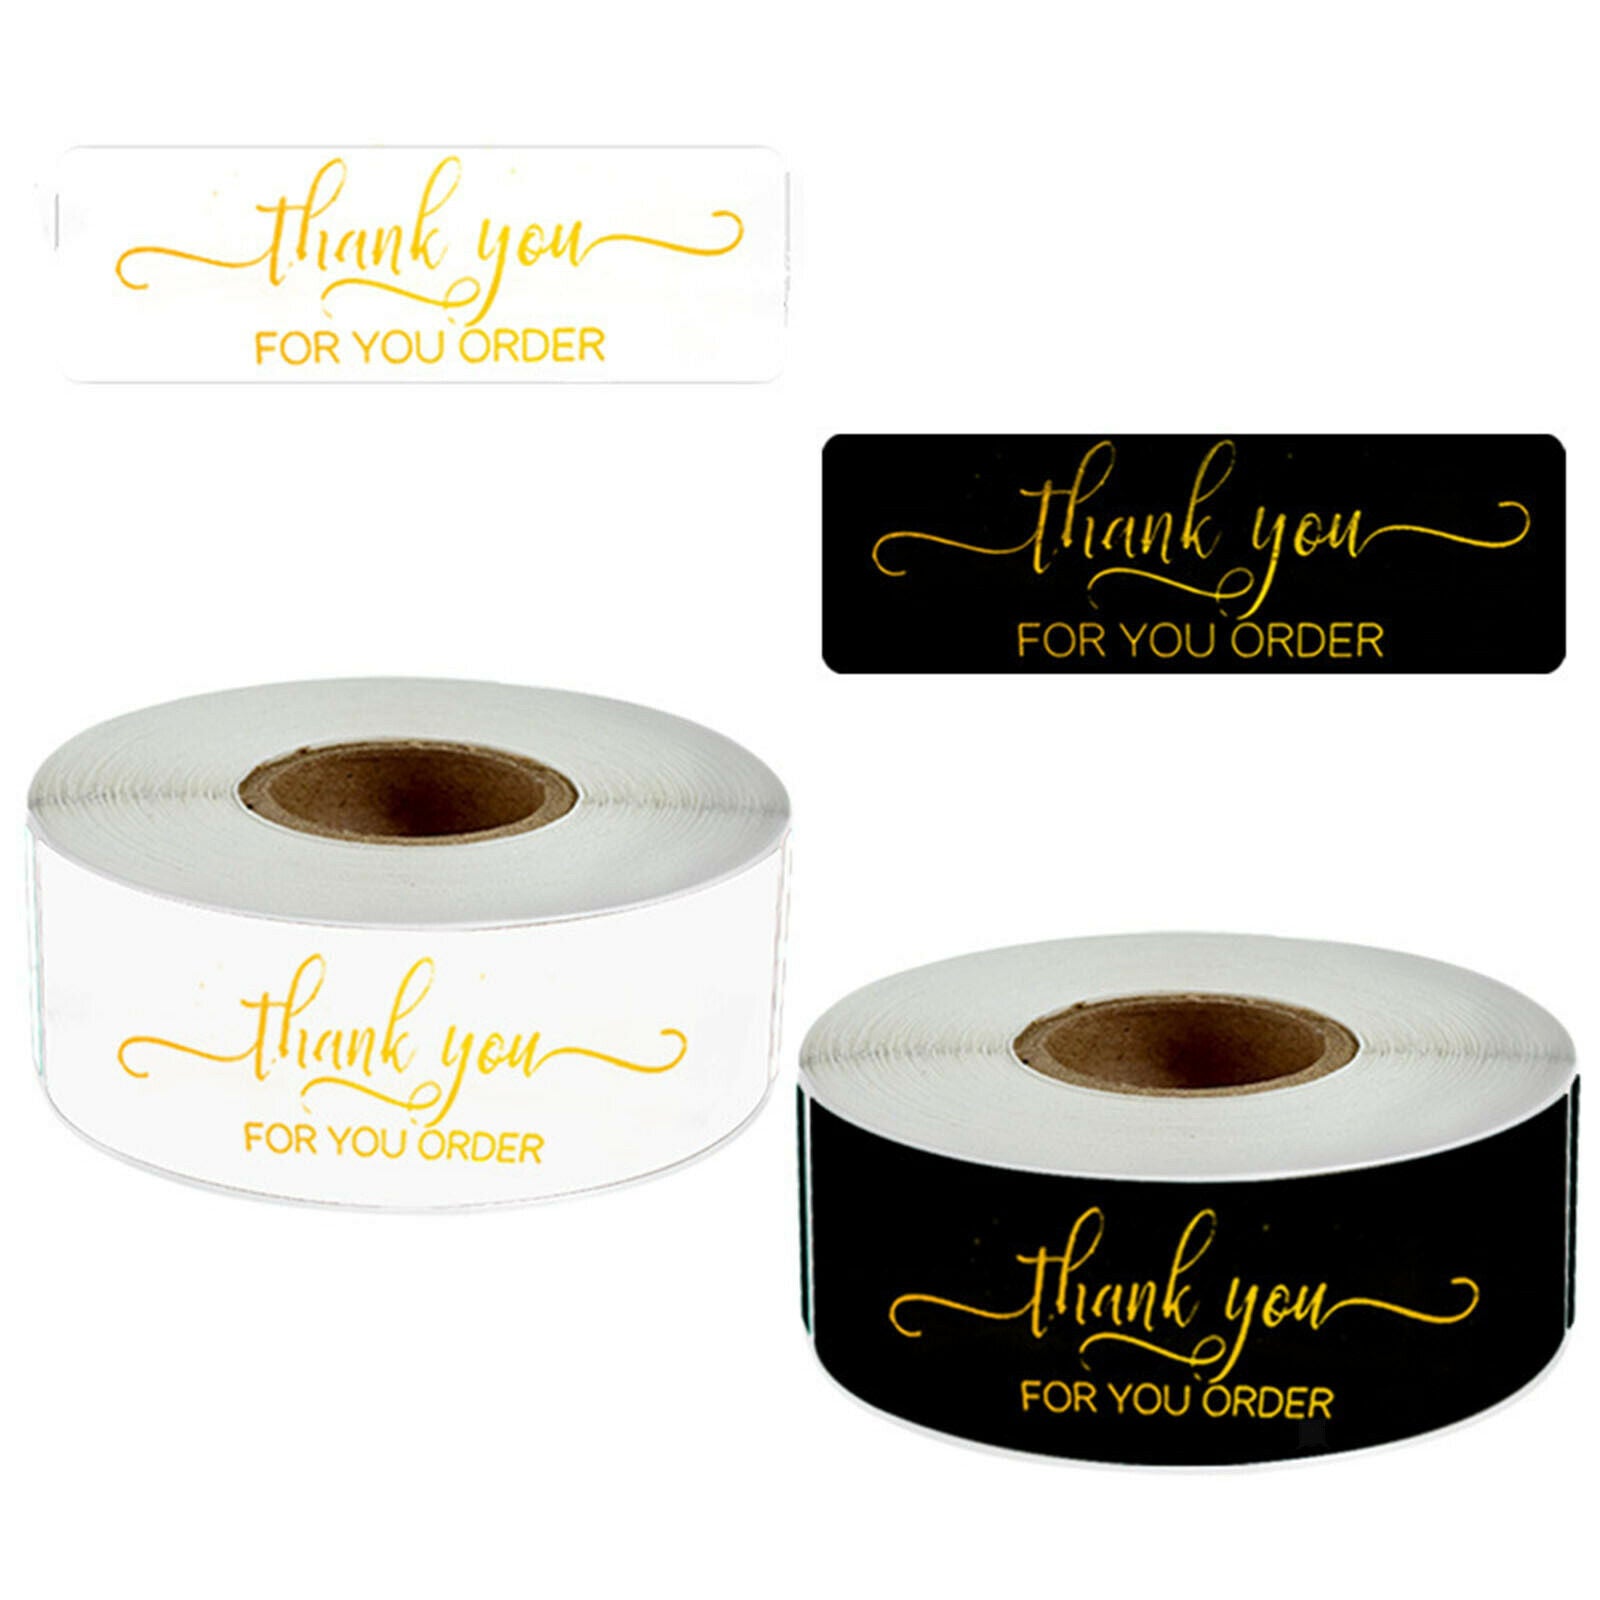 Thank You For Your Order Stickers Small Shop Decor Envelope Sealing Labels